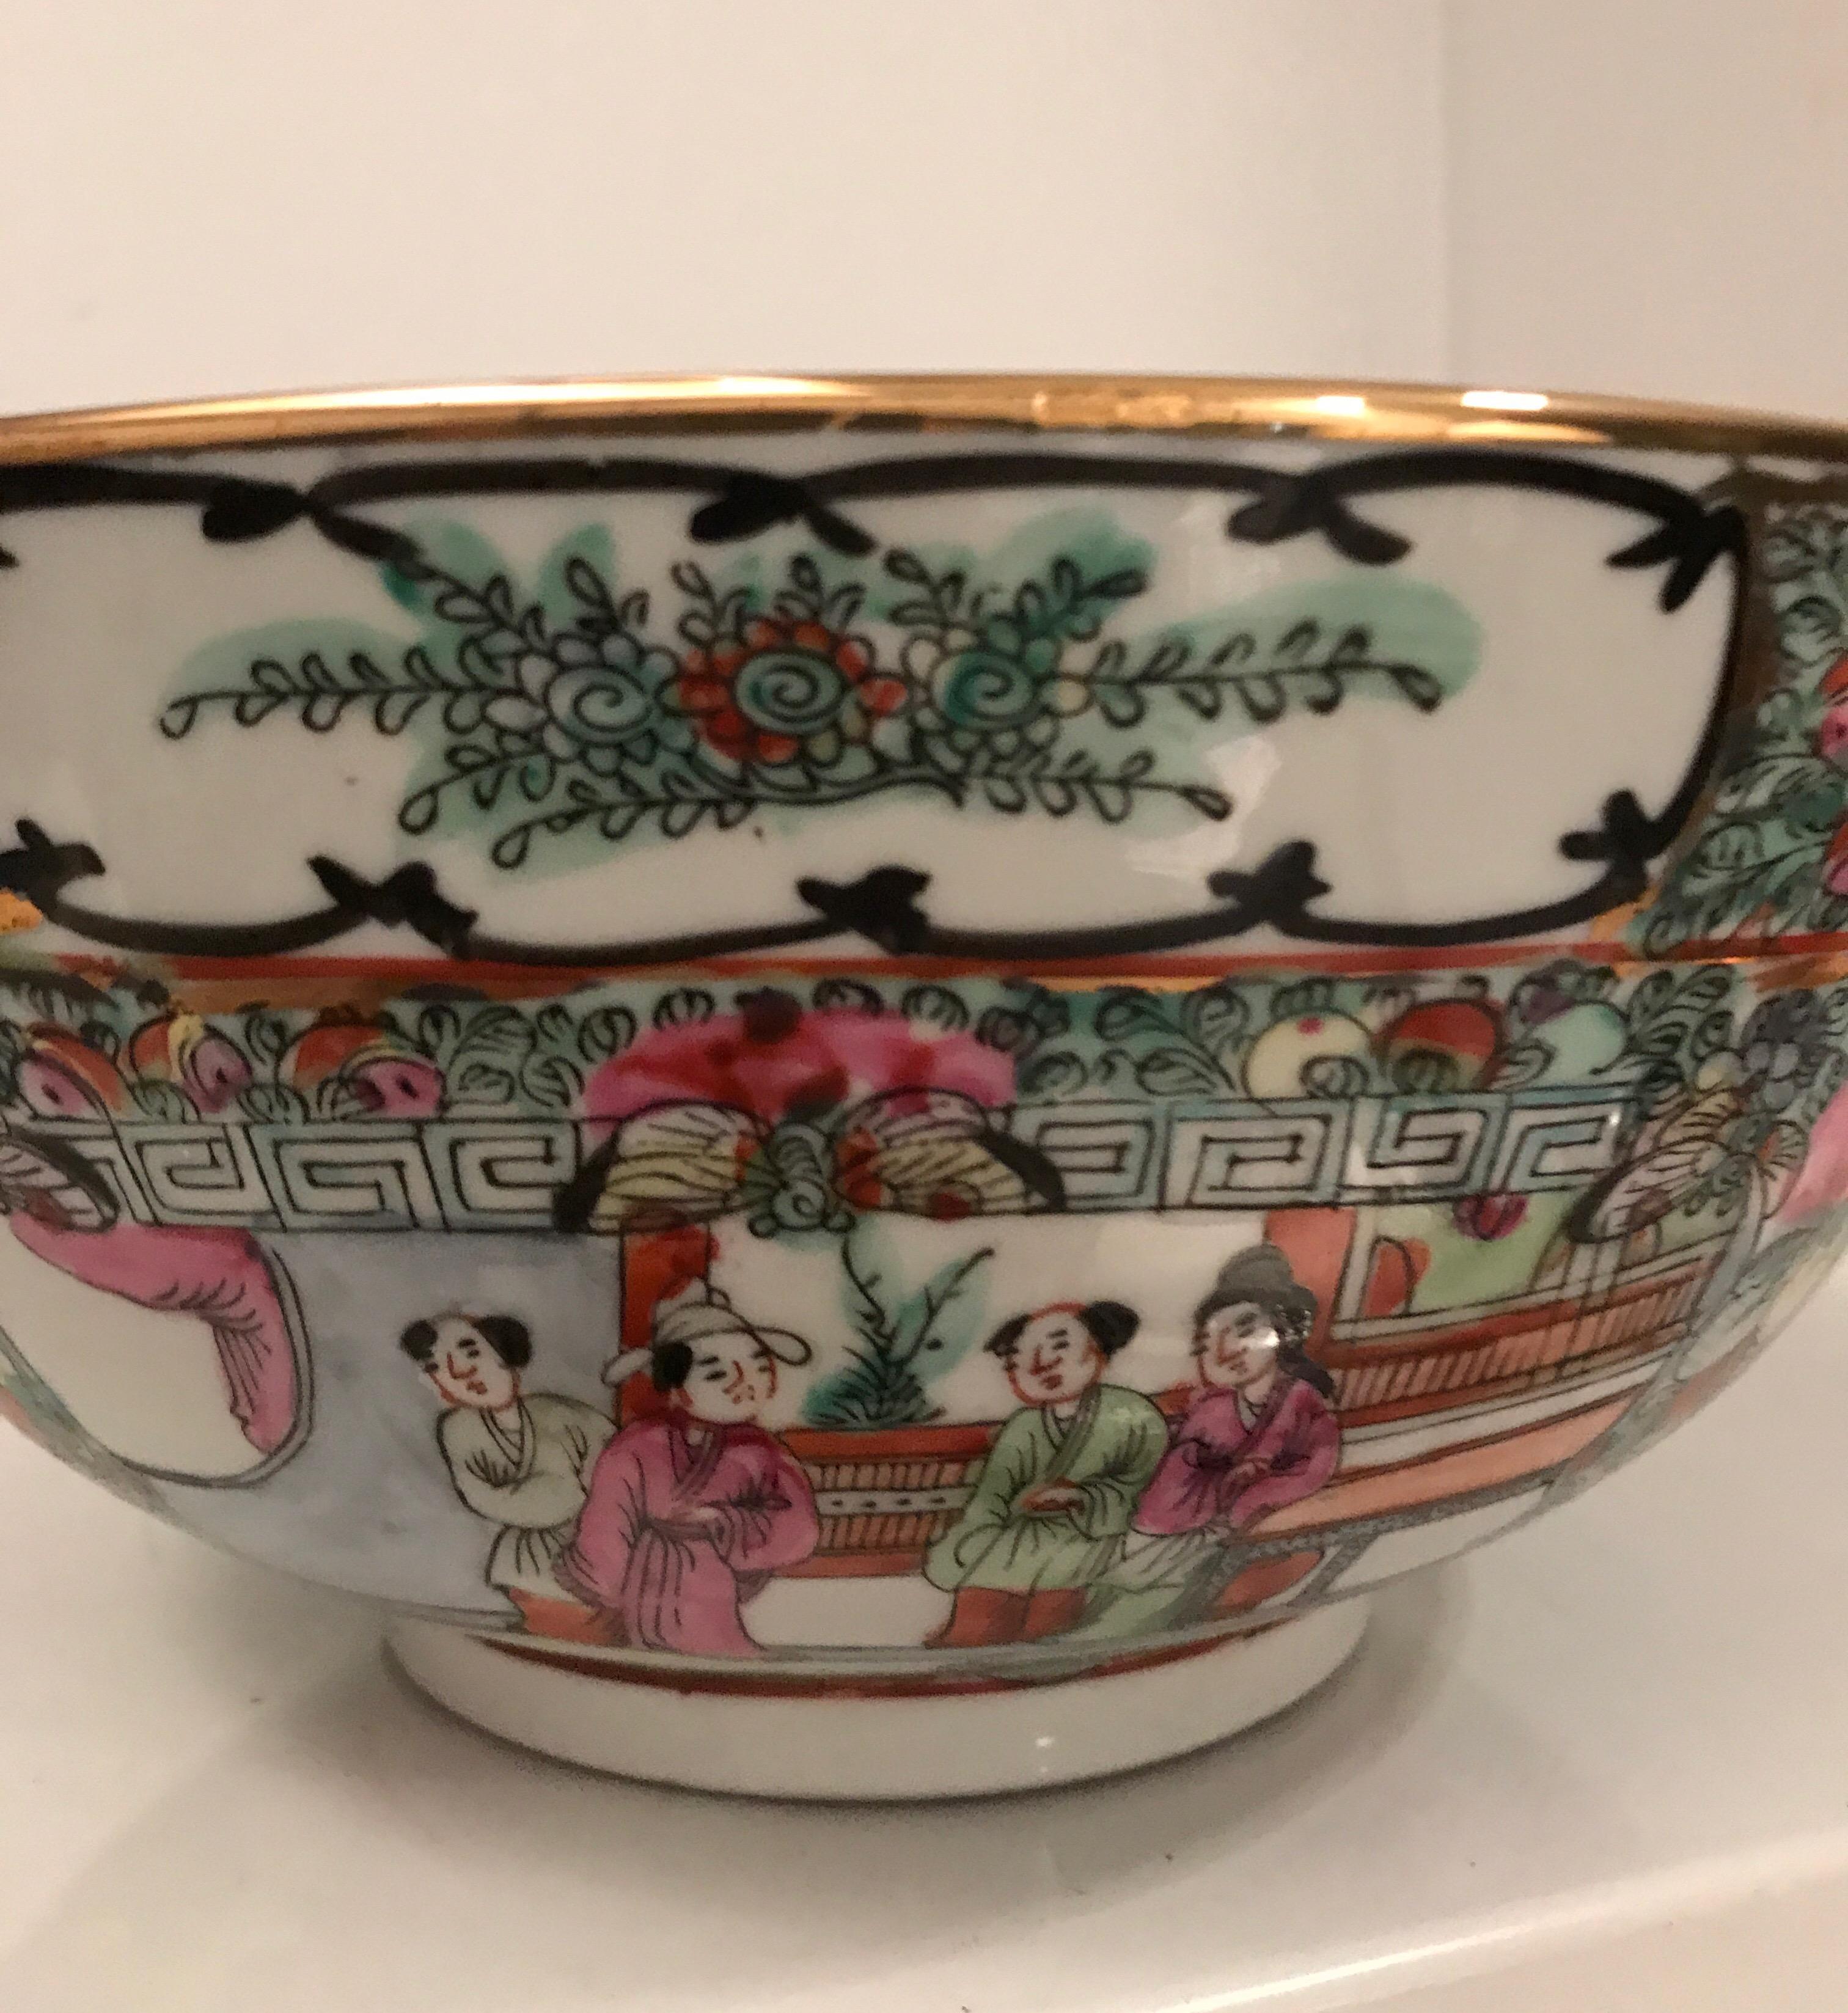 Finely decorated Cantonese enameled famille verte porcelain bowl.
The interior and exterior of the bowl are richly decorated with court scenes
and alternating panels of flowers and foliage.